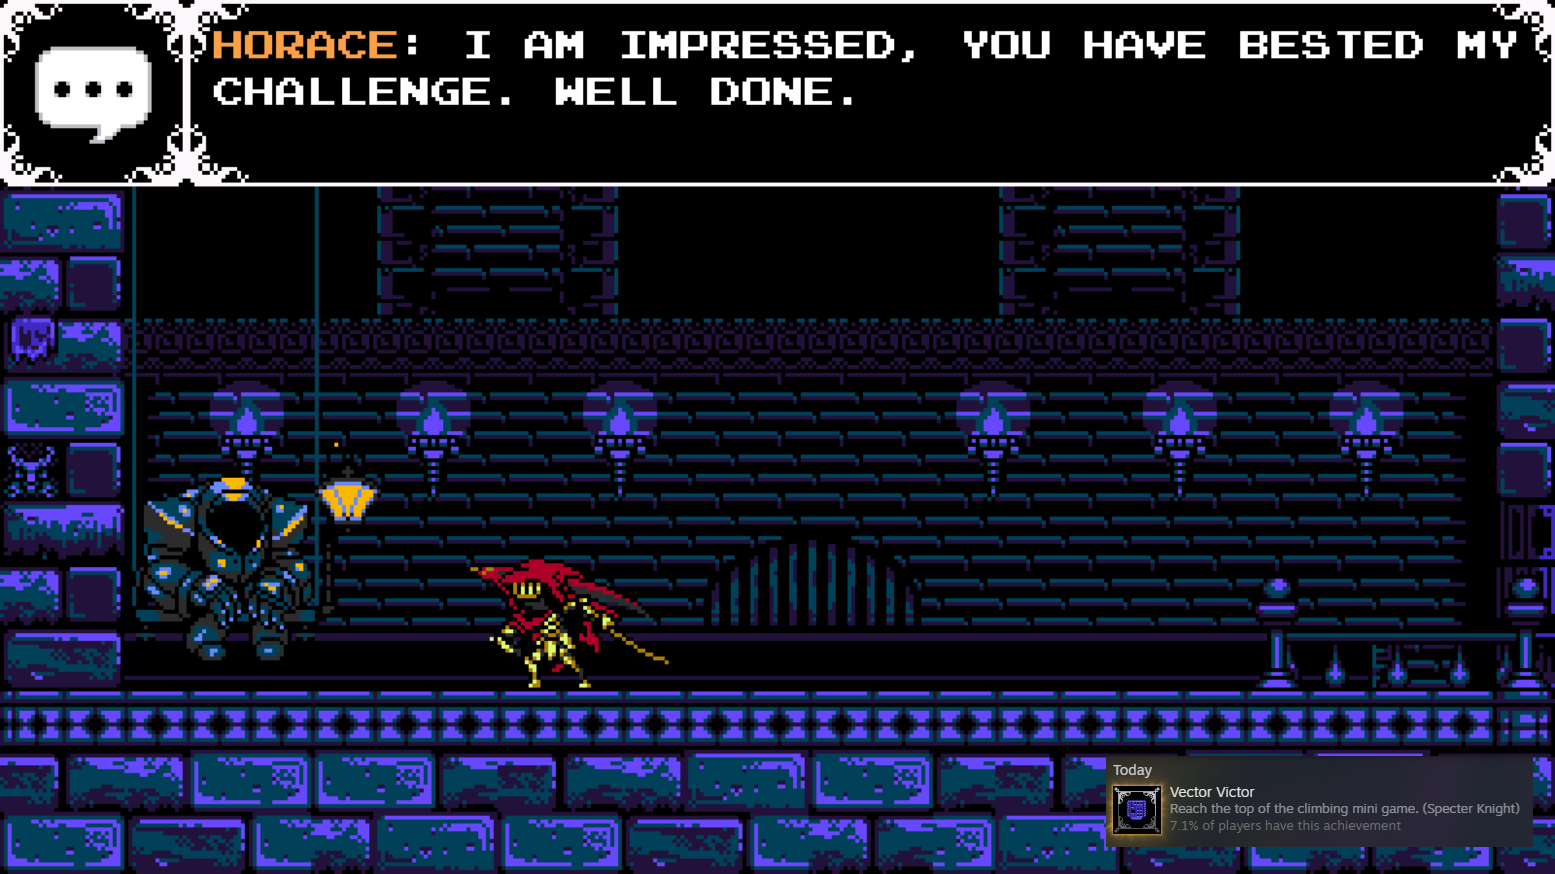 A screenshot of Shove Knight: Specter of Torment, the player talking to Horace after beating the tower challenge